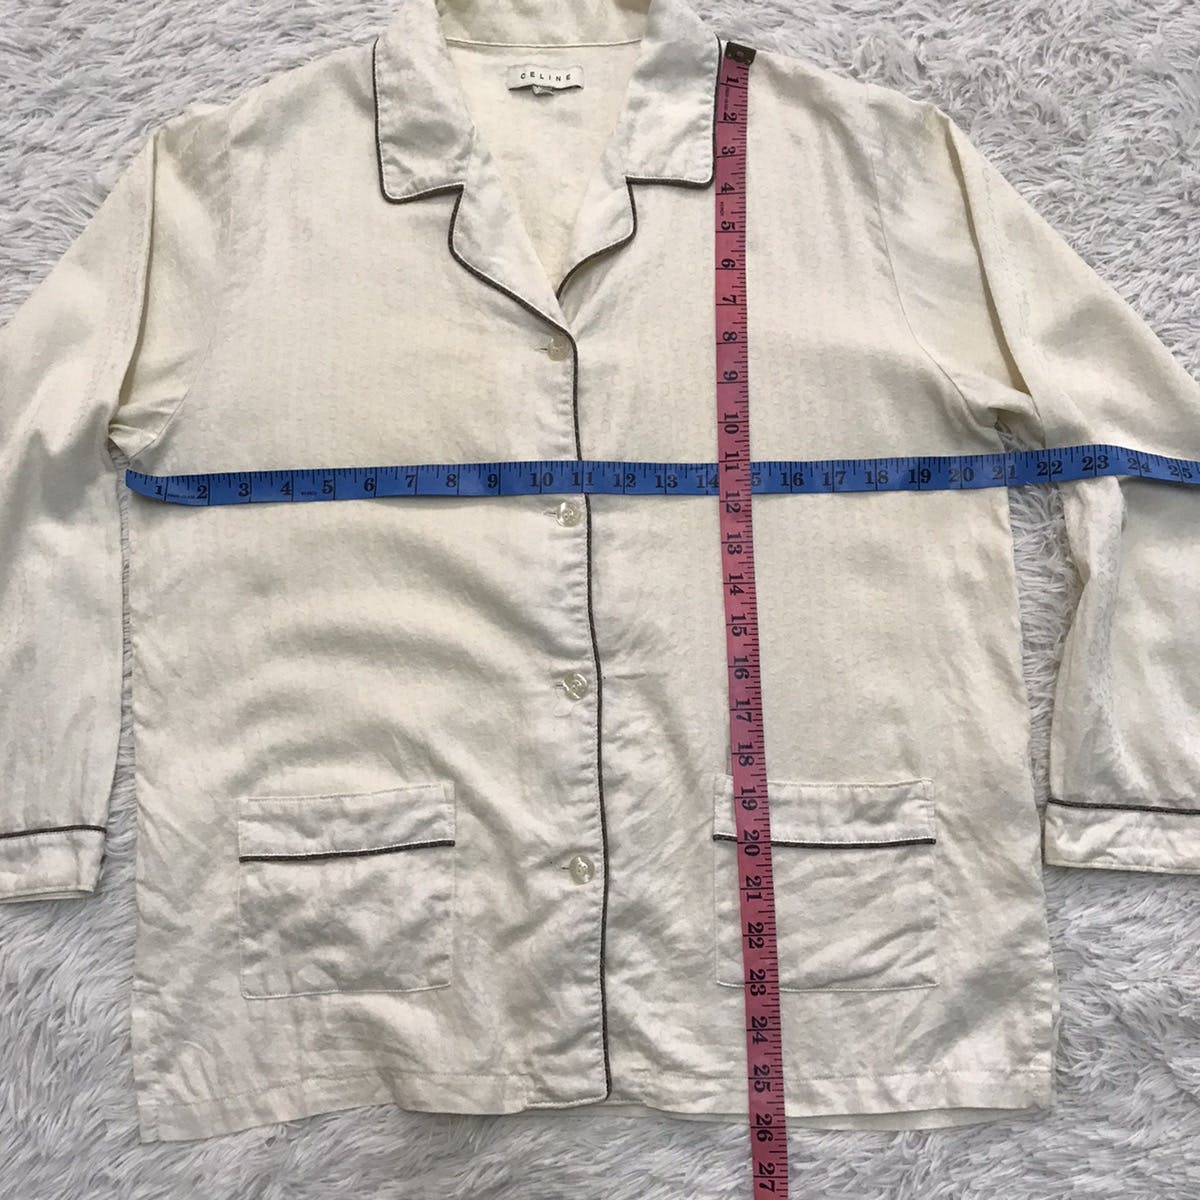 Celine button up shirt made in Japan - 4